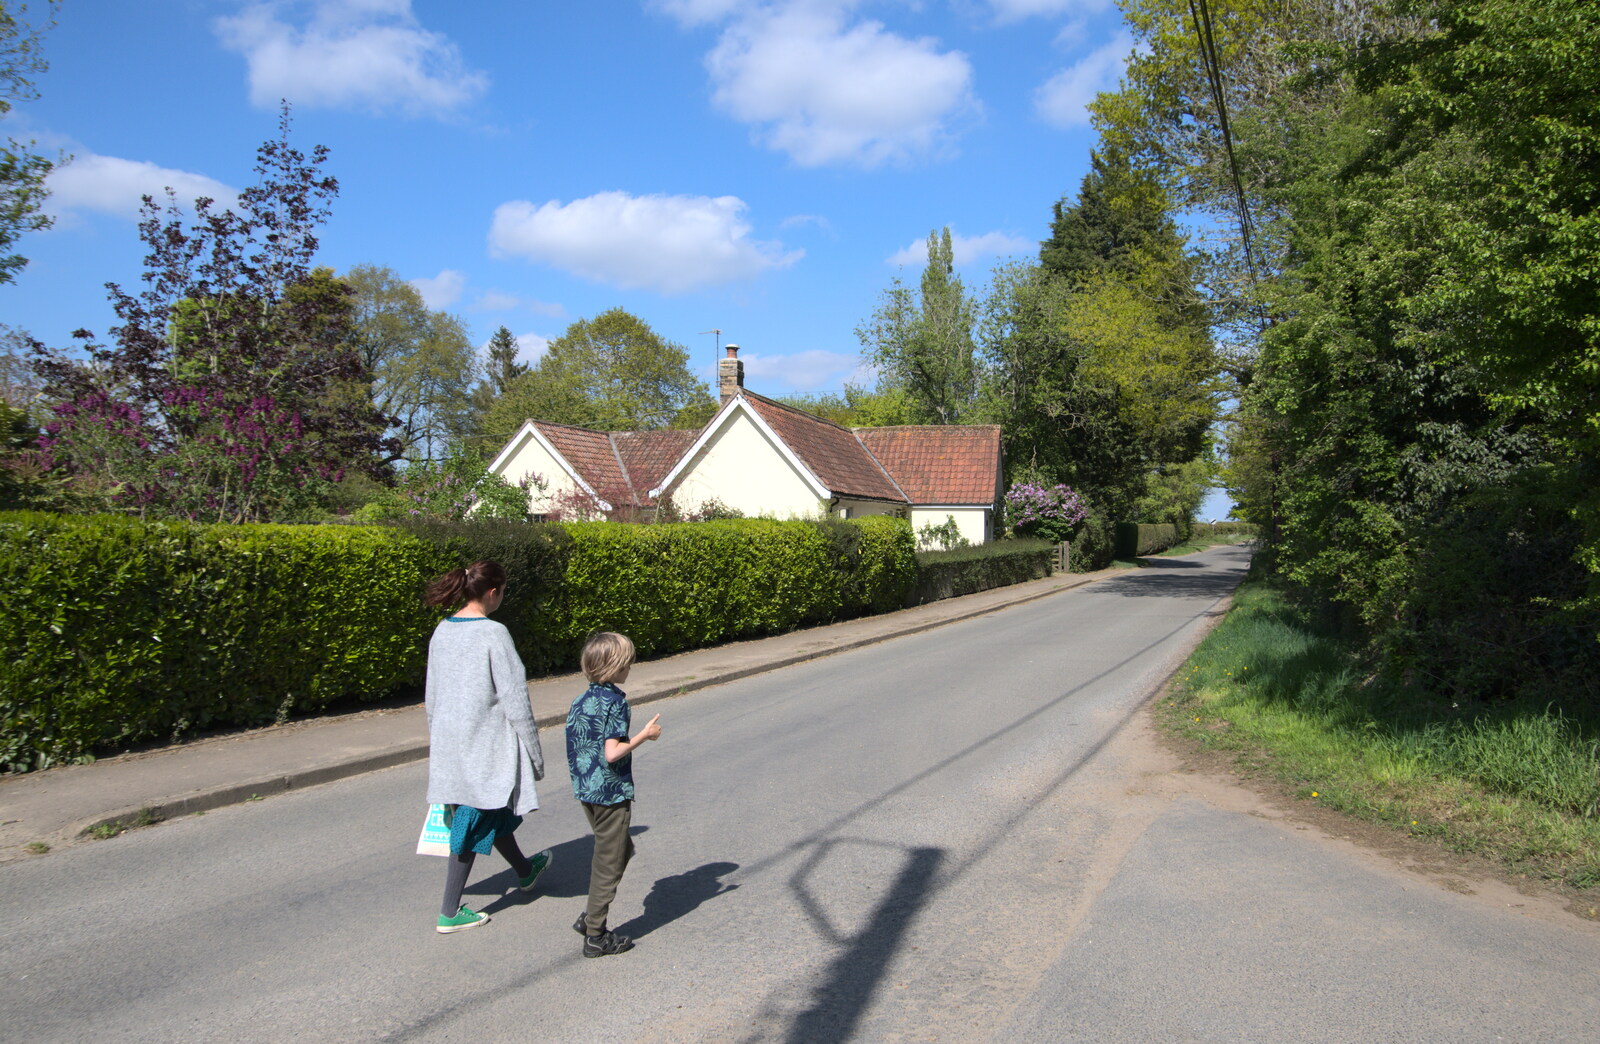 Isobel and Harry are on Brome Street from Lost Cat and a Walk on Nick's Lane, Brome, Suffolk - 26th April 2020